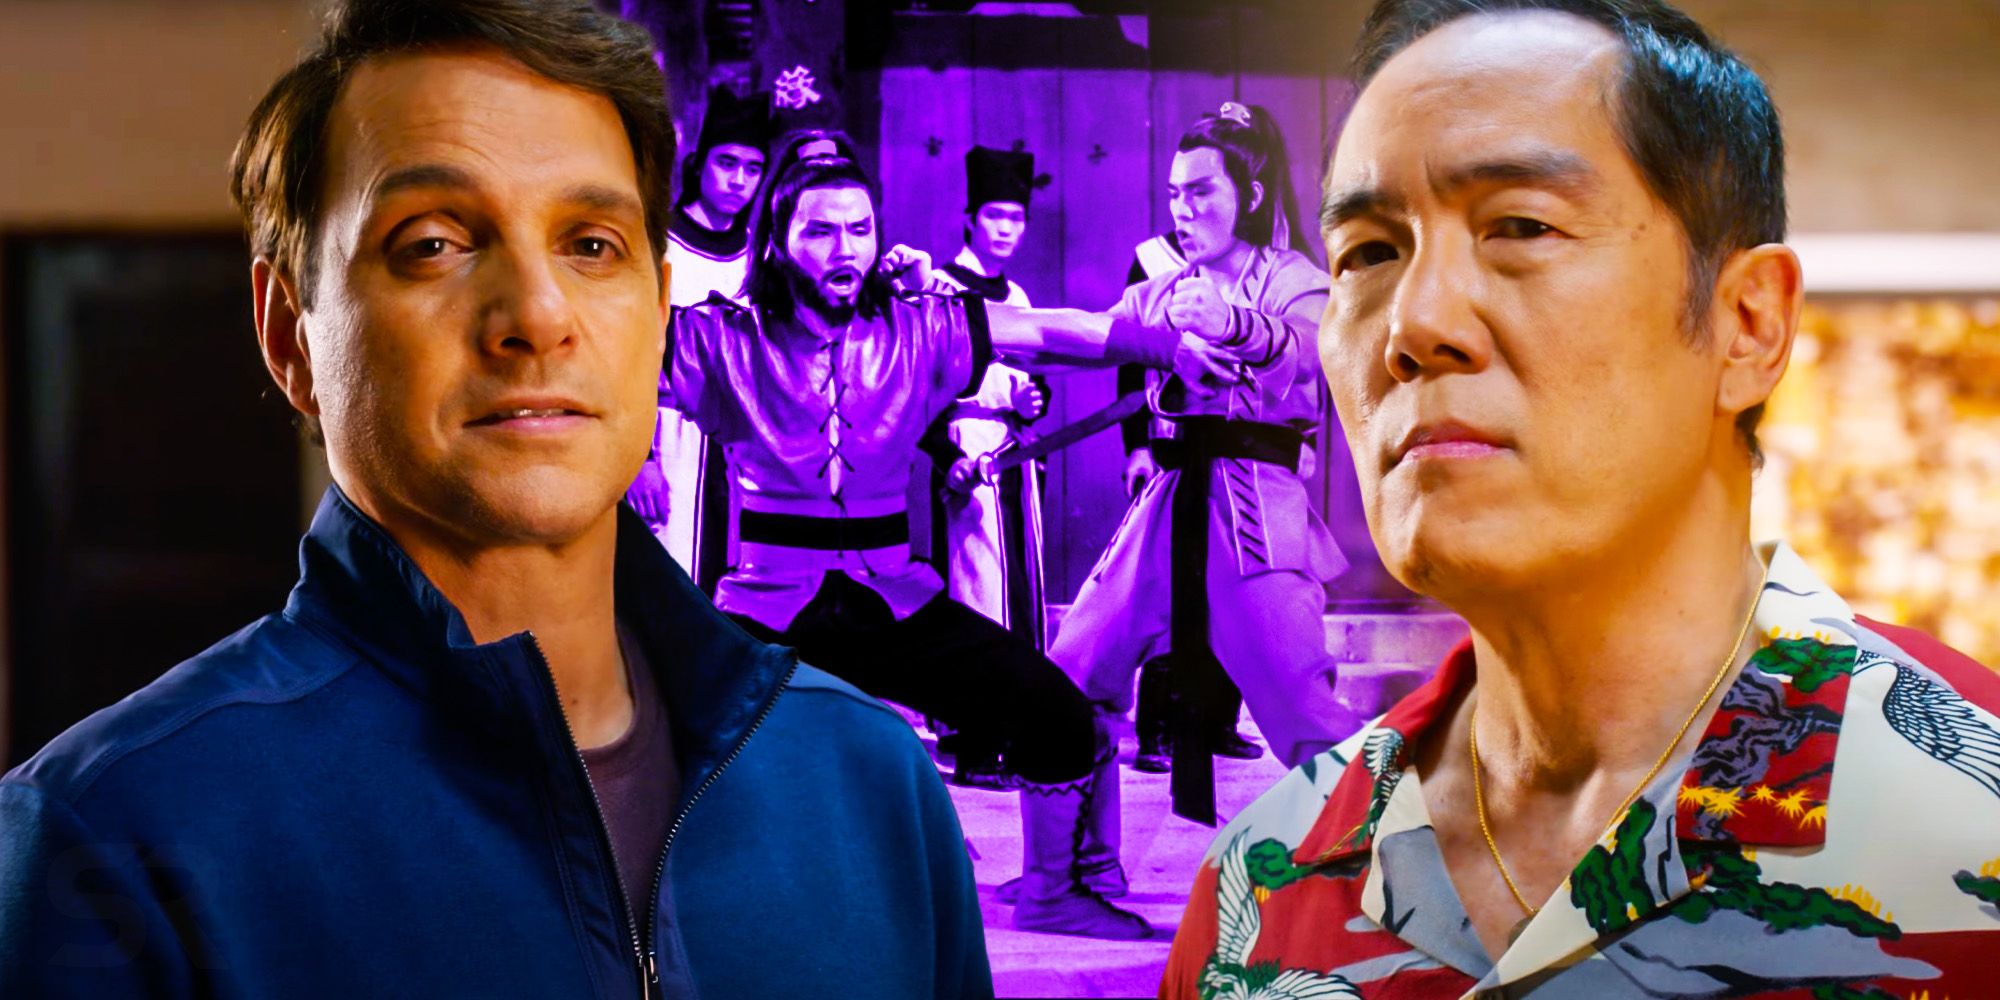 Who's stronger Silver or Chozen? And why? : r/cobrakai